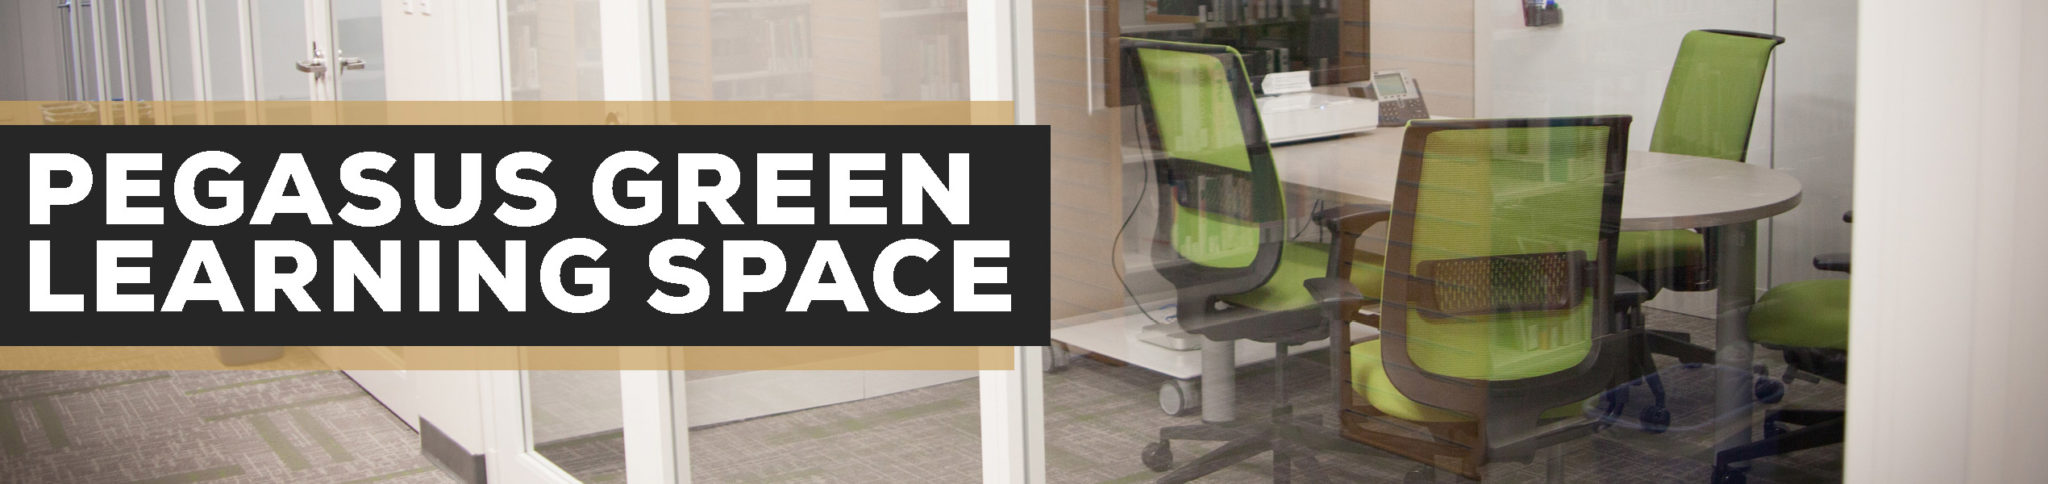 pegasus green learning spaces